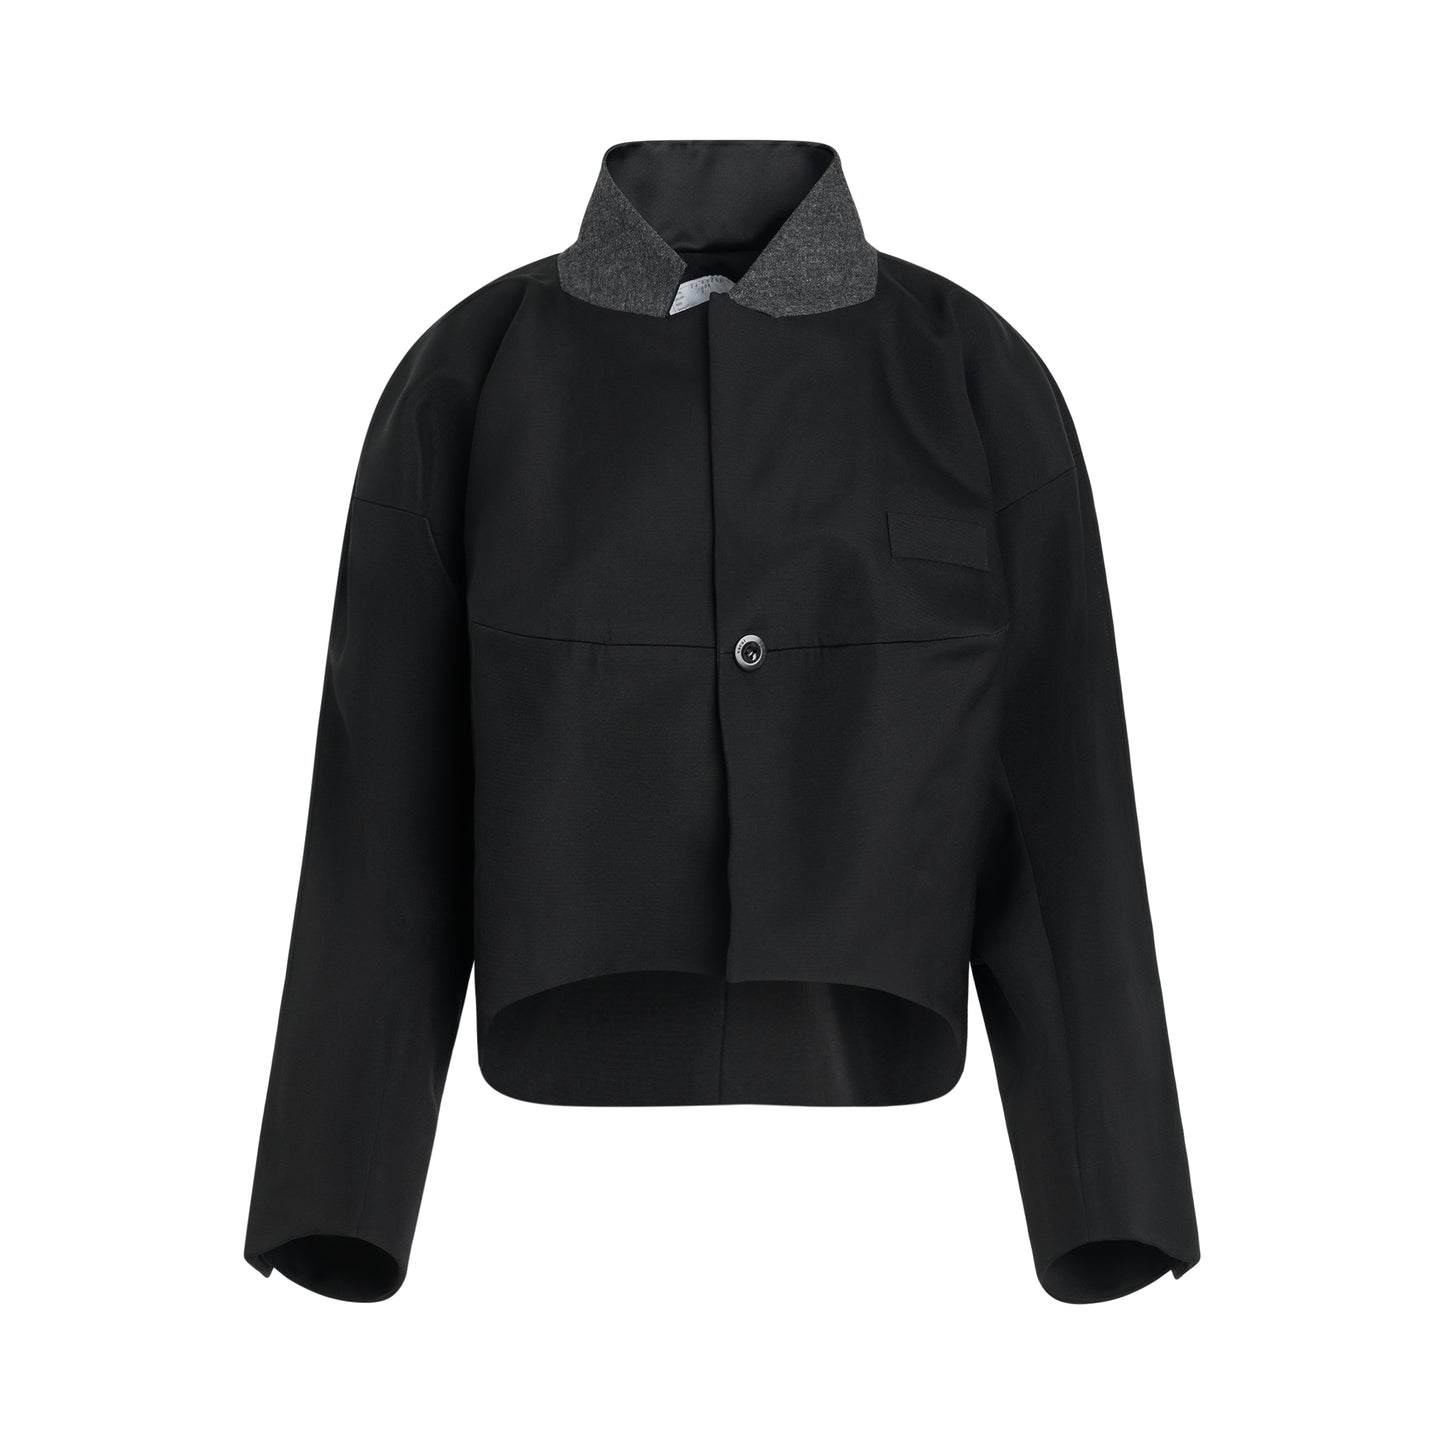 Double-Faced Silk Cotton Jacket in Black